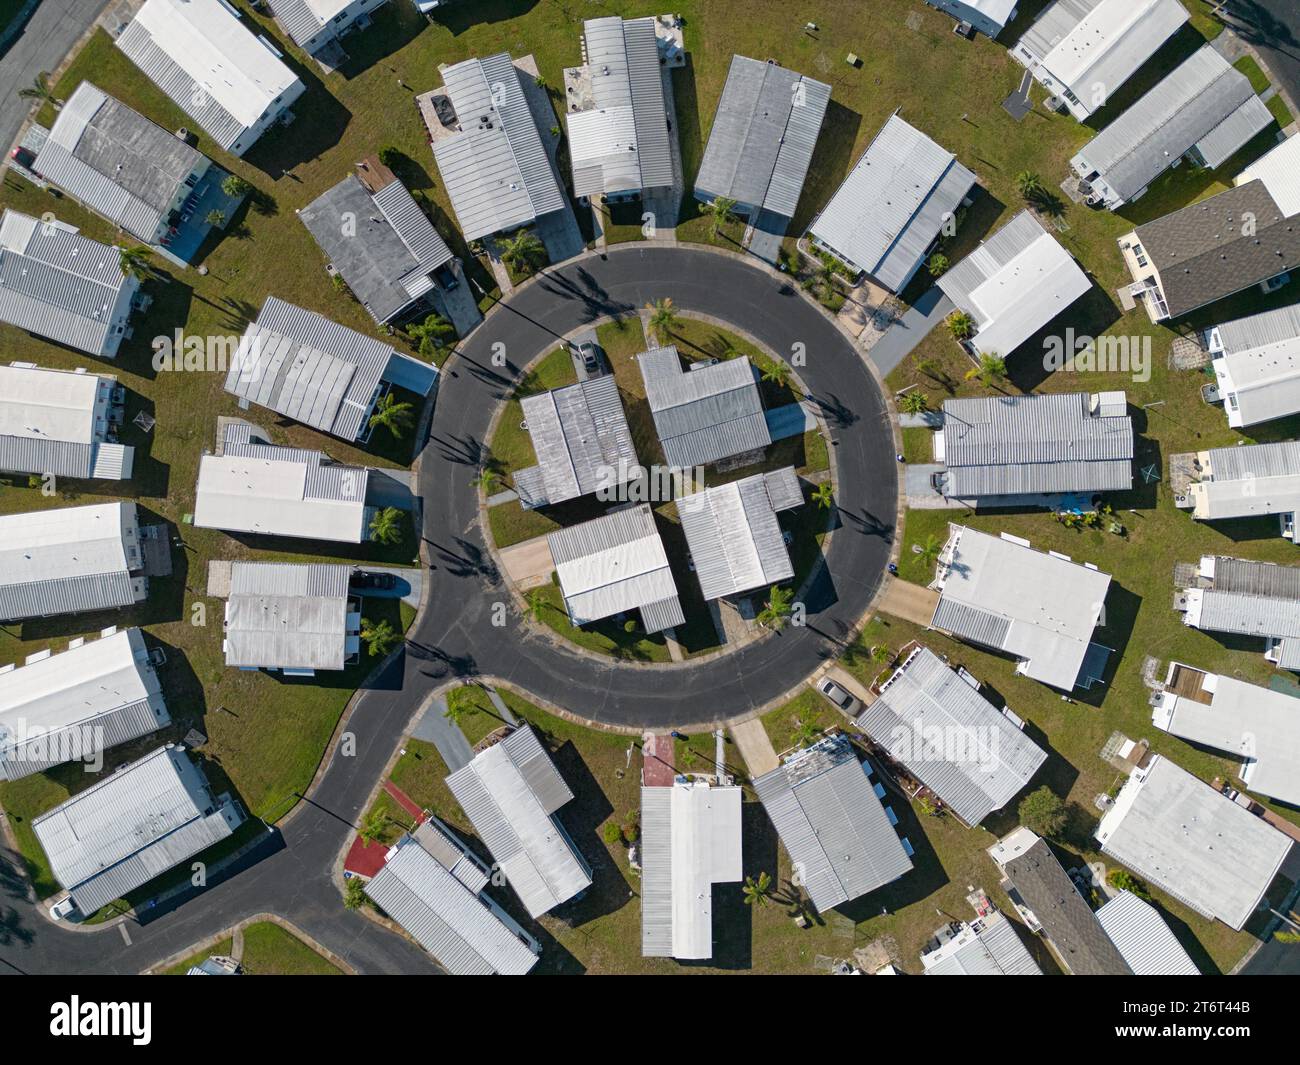 A mobile home neighborhood, configured in a circular layout, is shown from an aerial, daytime view among the community's streets. Stock Photo